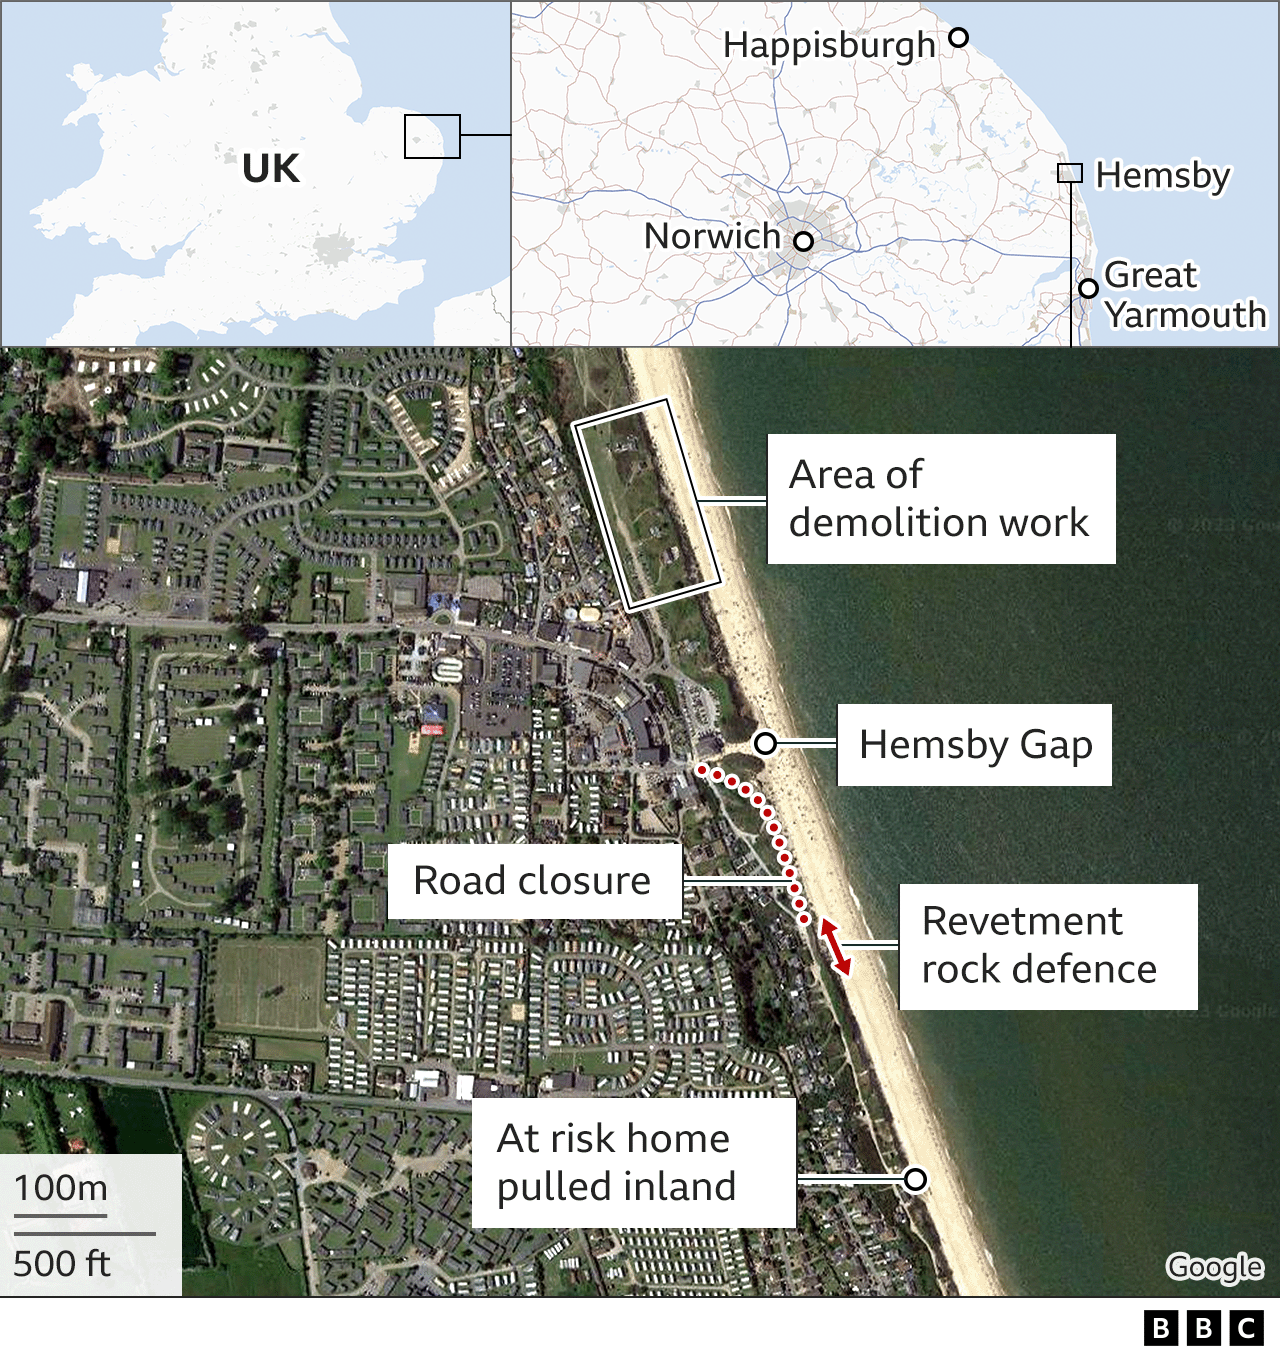 Illustration showing location of property demolition, new sea defences and beach access at Hemsby Gap in Norfolk